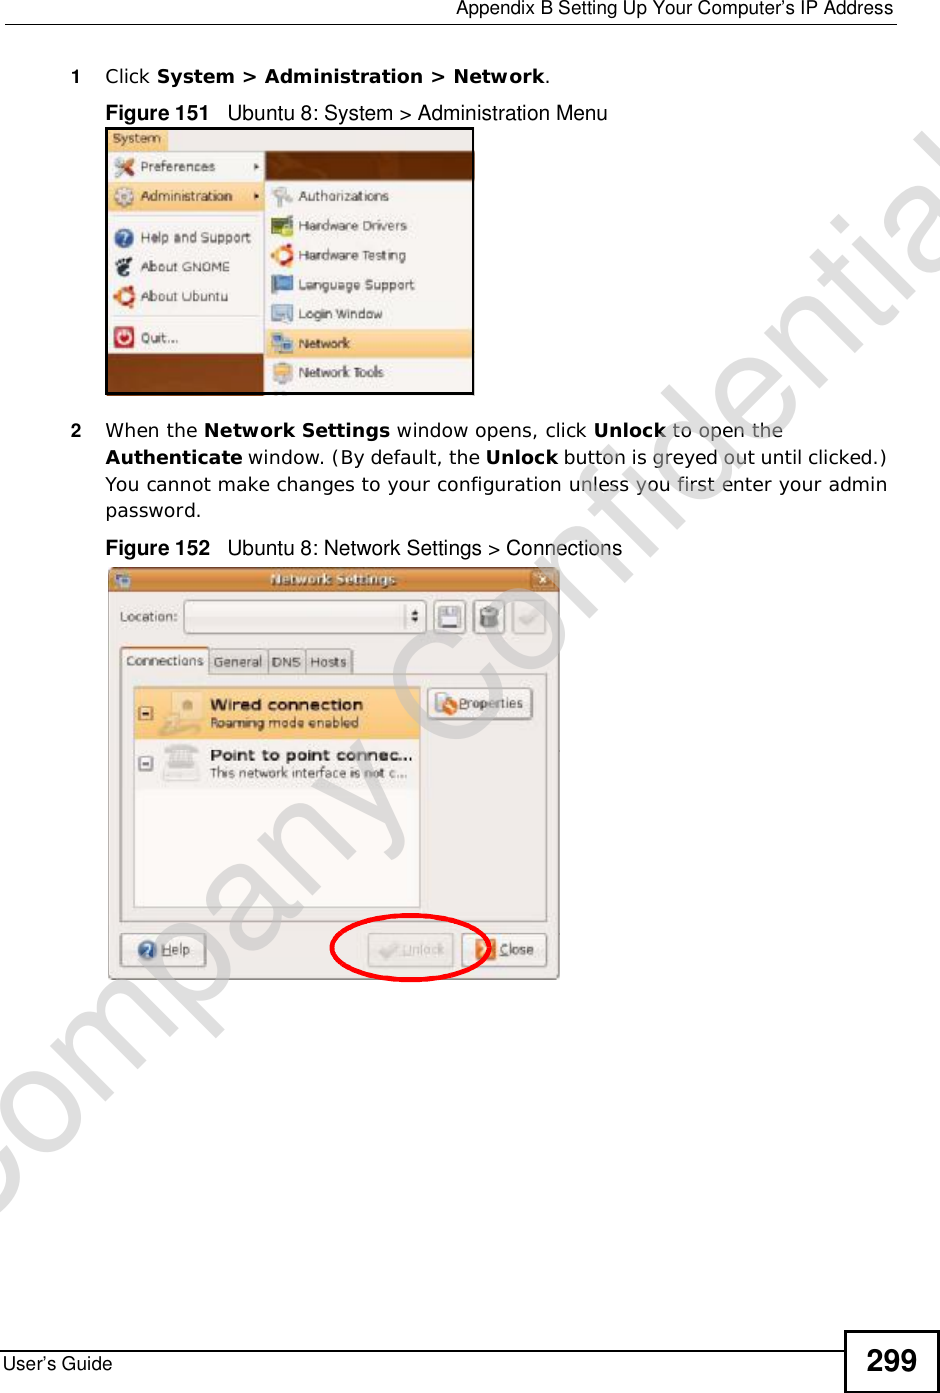  Appendix BSetting Up Your Computer’s IP AddressUser’s Guide 2991Click System &gt; Administration &gt; Network.Figure 151   Ubuntu 8: System &gt; Administration Menu2When the Network Settings window opens, click Unlock to open the Authenticate window. (By default, the Unlock button is greyed out until clicked.) You cannot make changes to your configuration unless you first enter your admin password.Figure 152   Ubuntu 8: Network Settings &gt; ConnectionsCompany Confidential